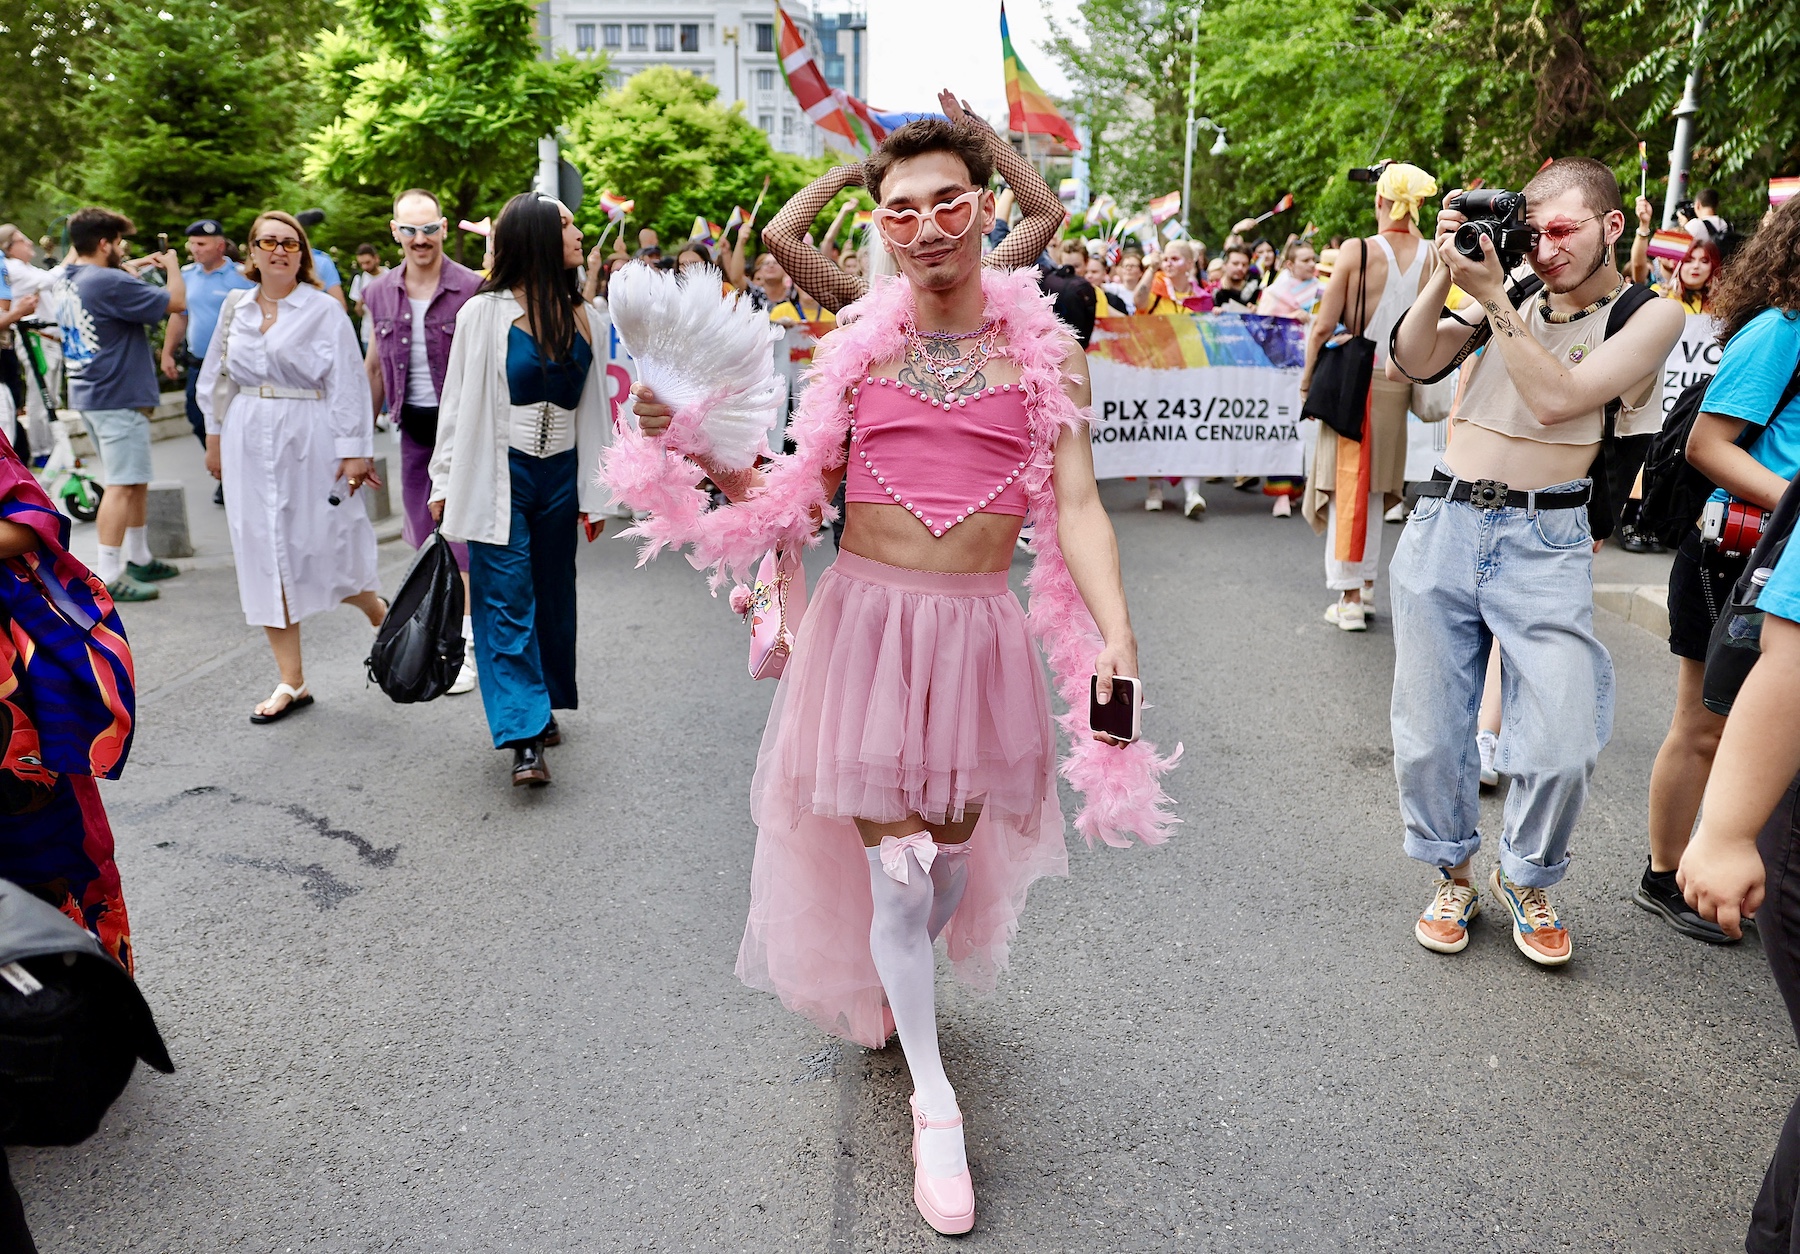 LGBTQ supporter dresses in an all pink outfit